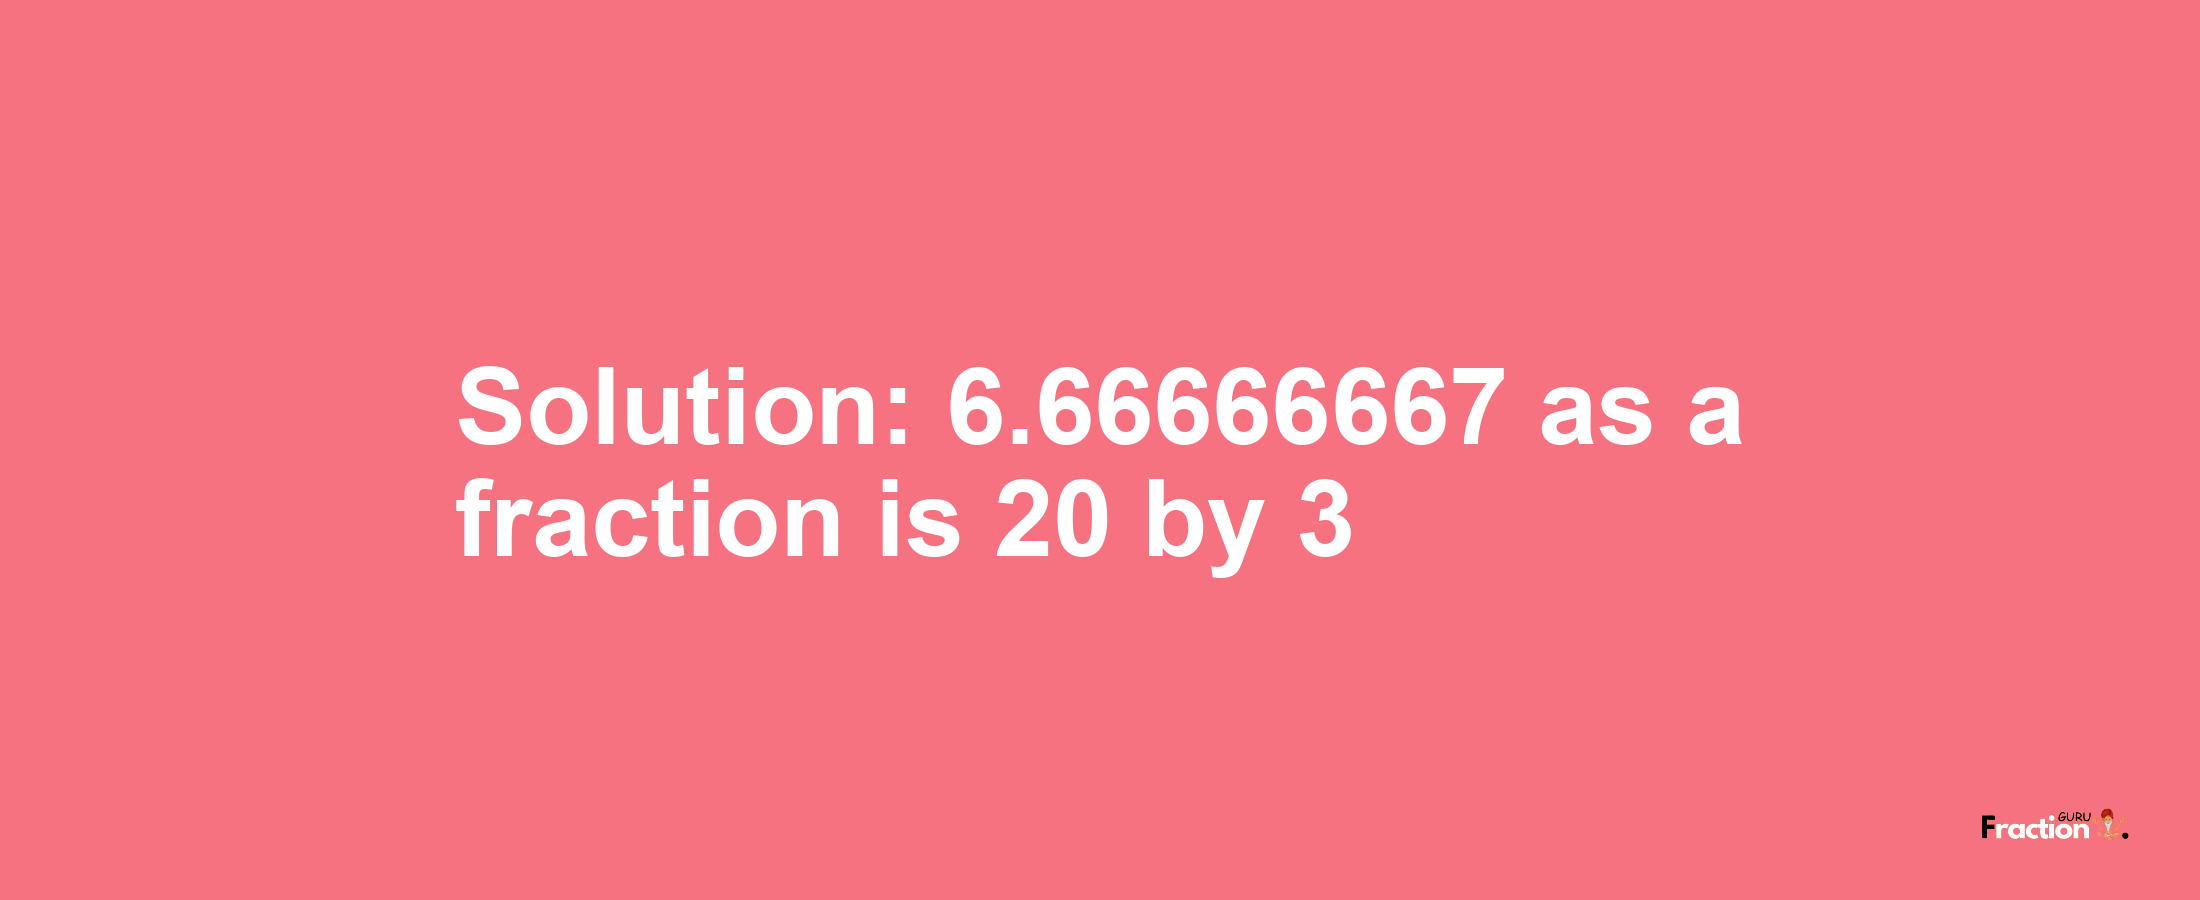 Solution:6.66666667 as a fraction is 20/3